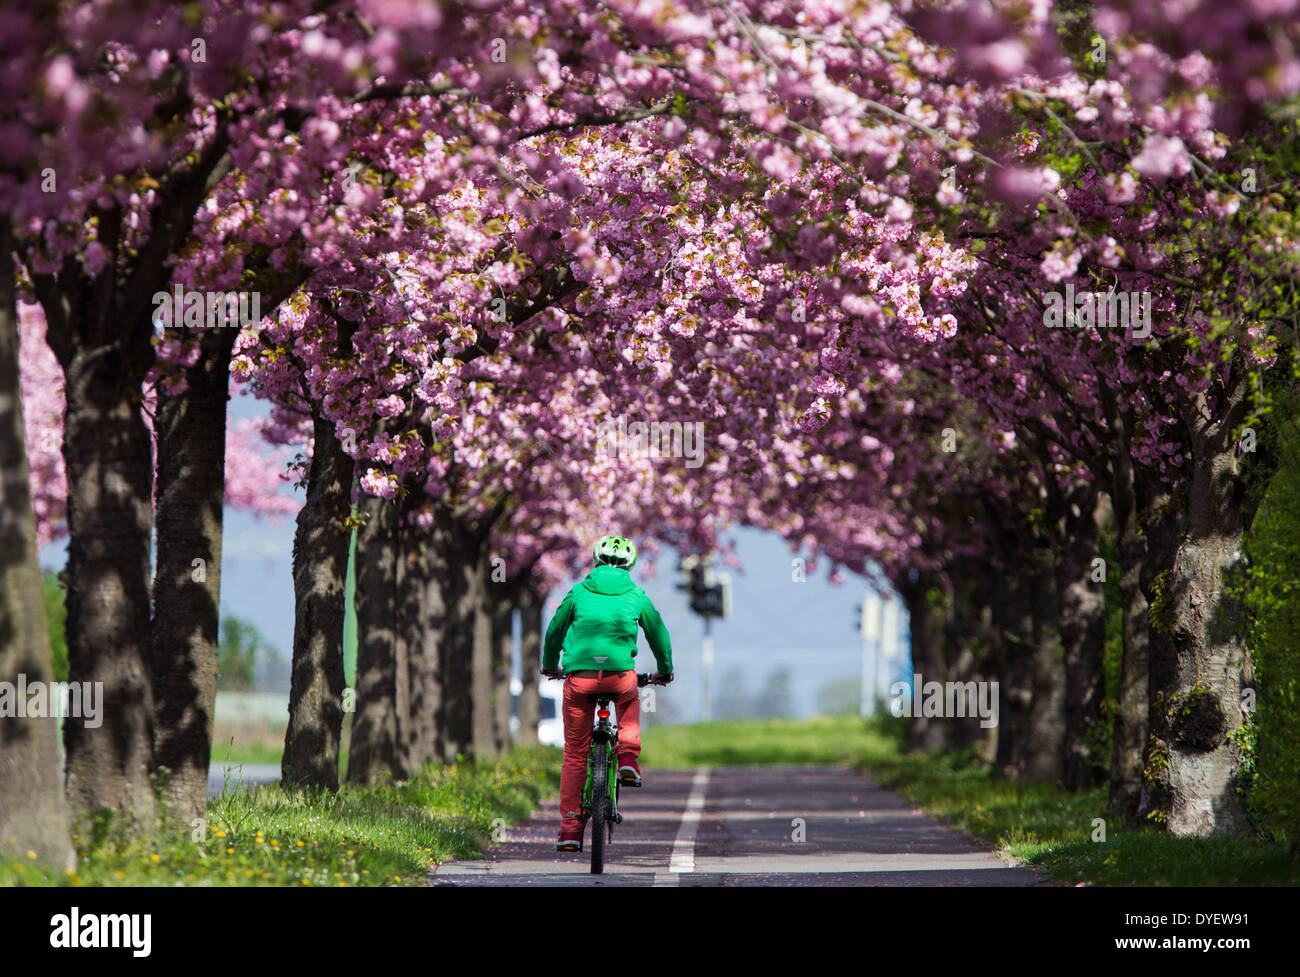 Magdeburg, Germany. 14th Apr, 2014. A cyclist rides on his bicycle along an alley framed by flowering cherry blossom trees in Magdeburg, Germany, 14 April 2014. Photo: Lukas Schulze/dpa/Alamy Live News Stock Photo